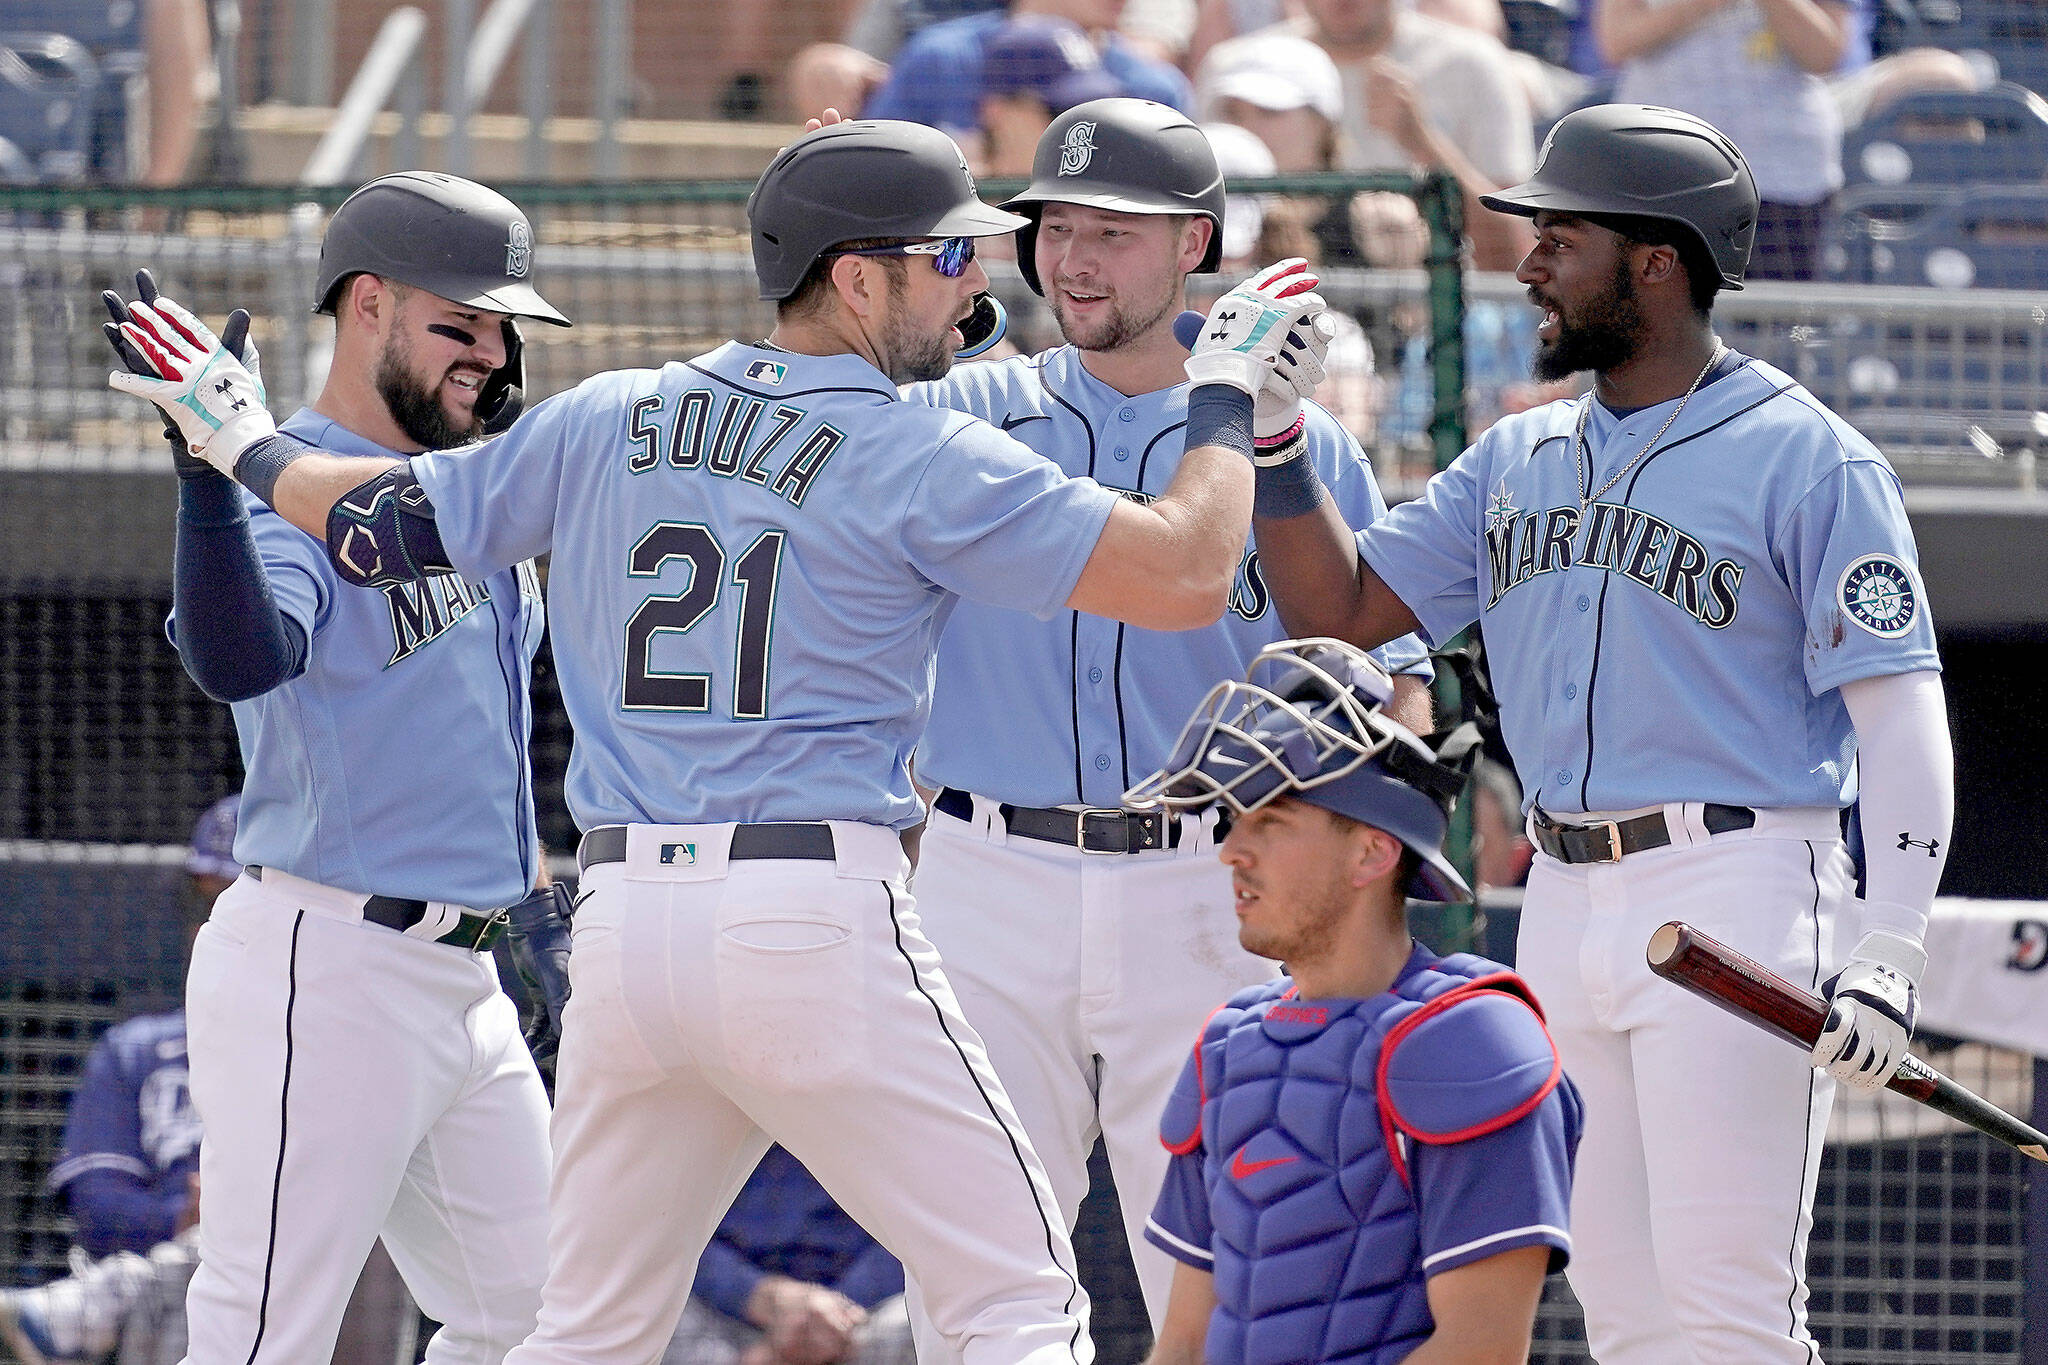 The Mariners’ Steven Souza Jr. (21) celebrates with teammates after hitting a grand slam during the first inning of a spring training game against the Dodgers on Saturday in Peoria, Ariz. (AP Photo/Charlie Riedel)